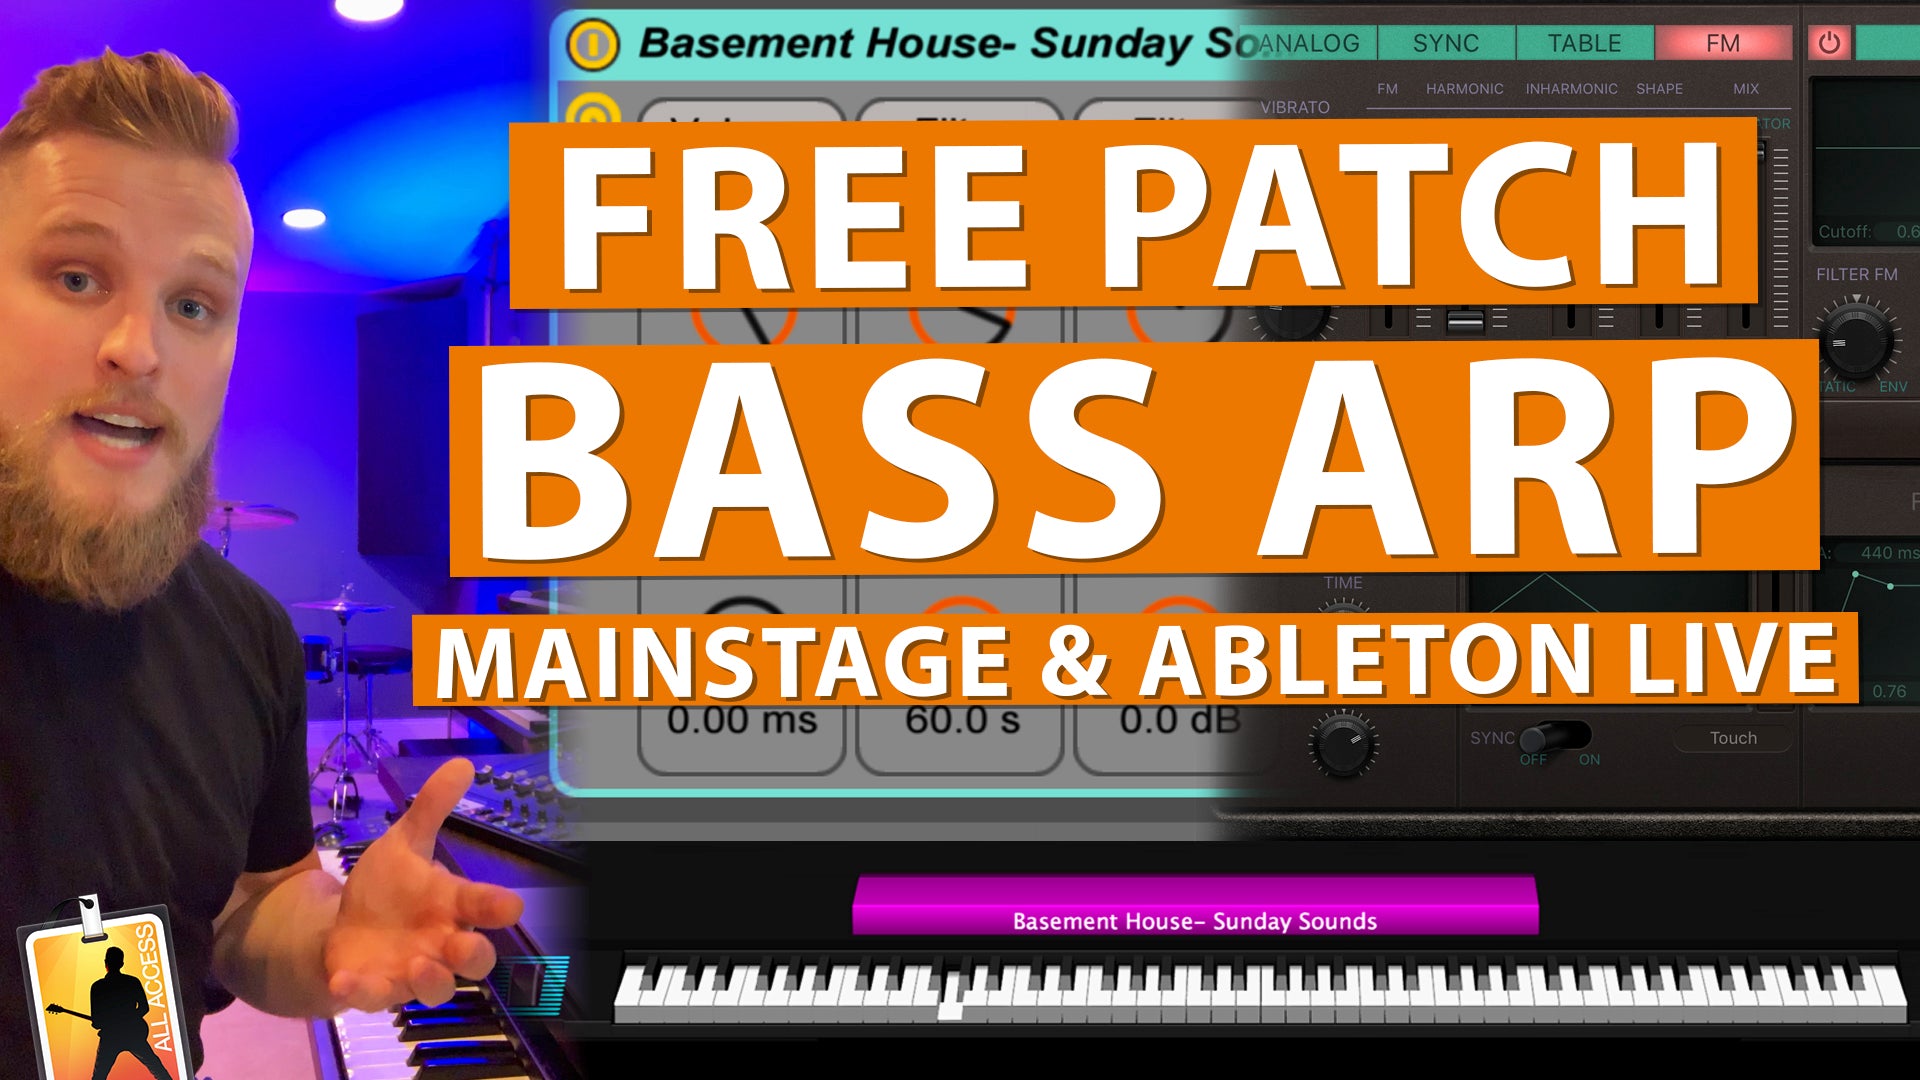 Free MainStage & Ableton Worship Bass Arp Patch! - Basement House